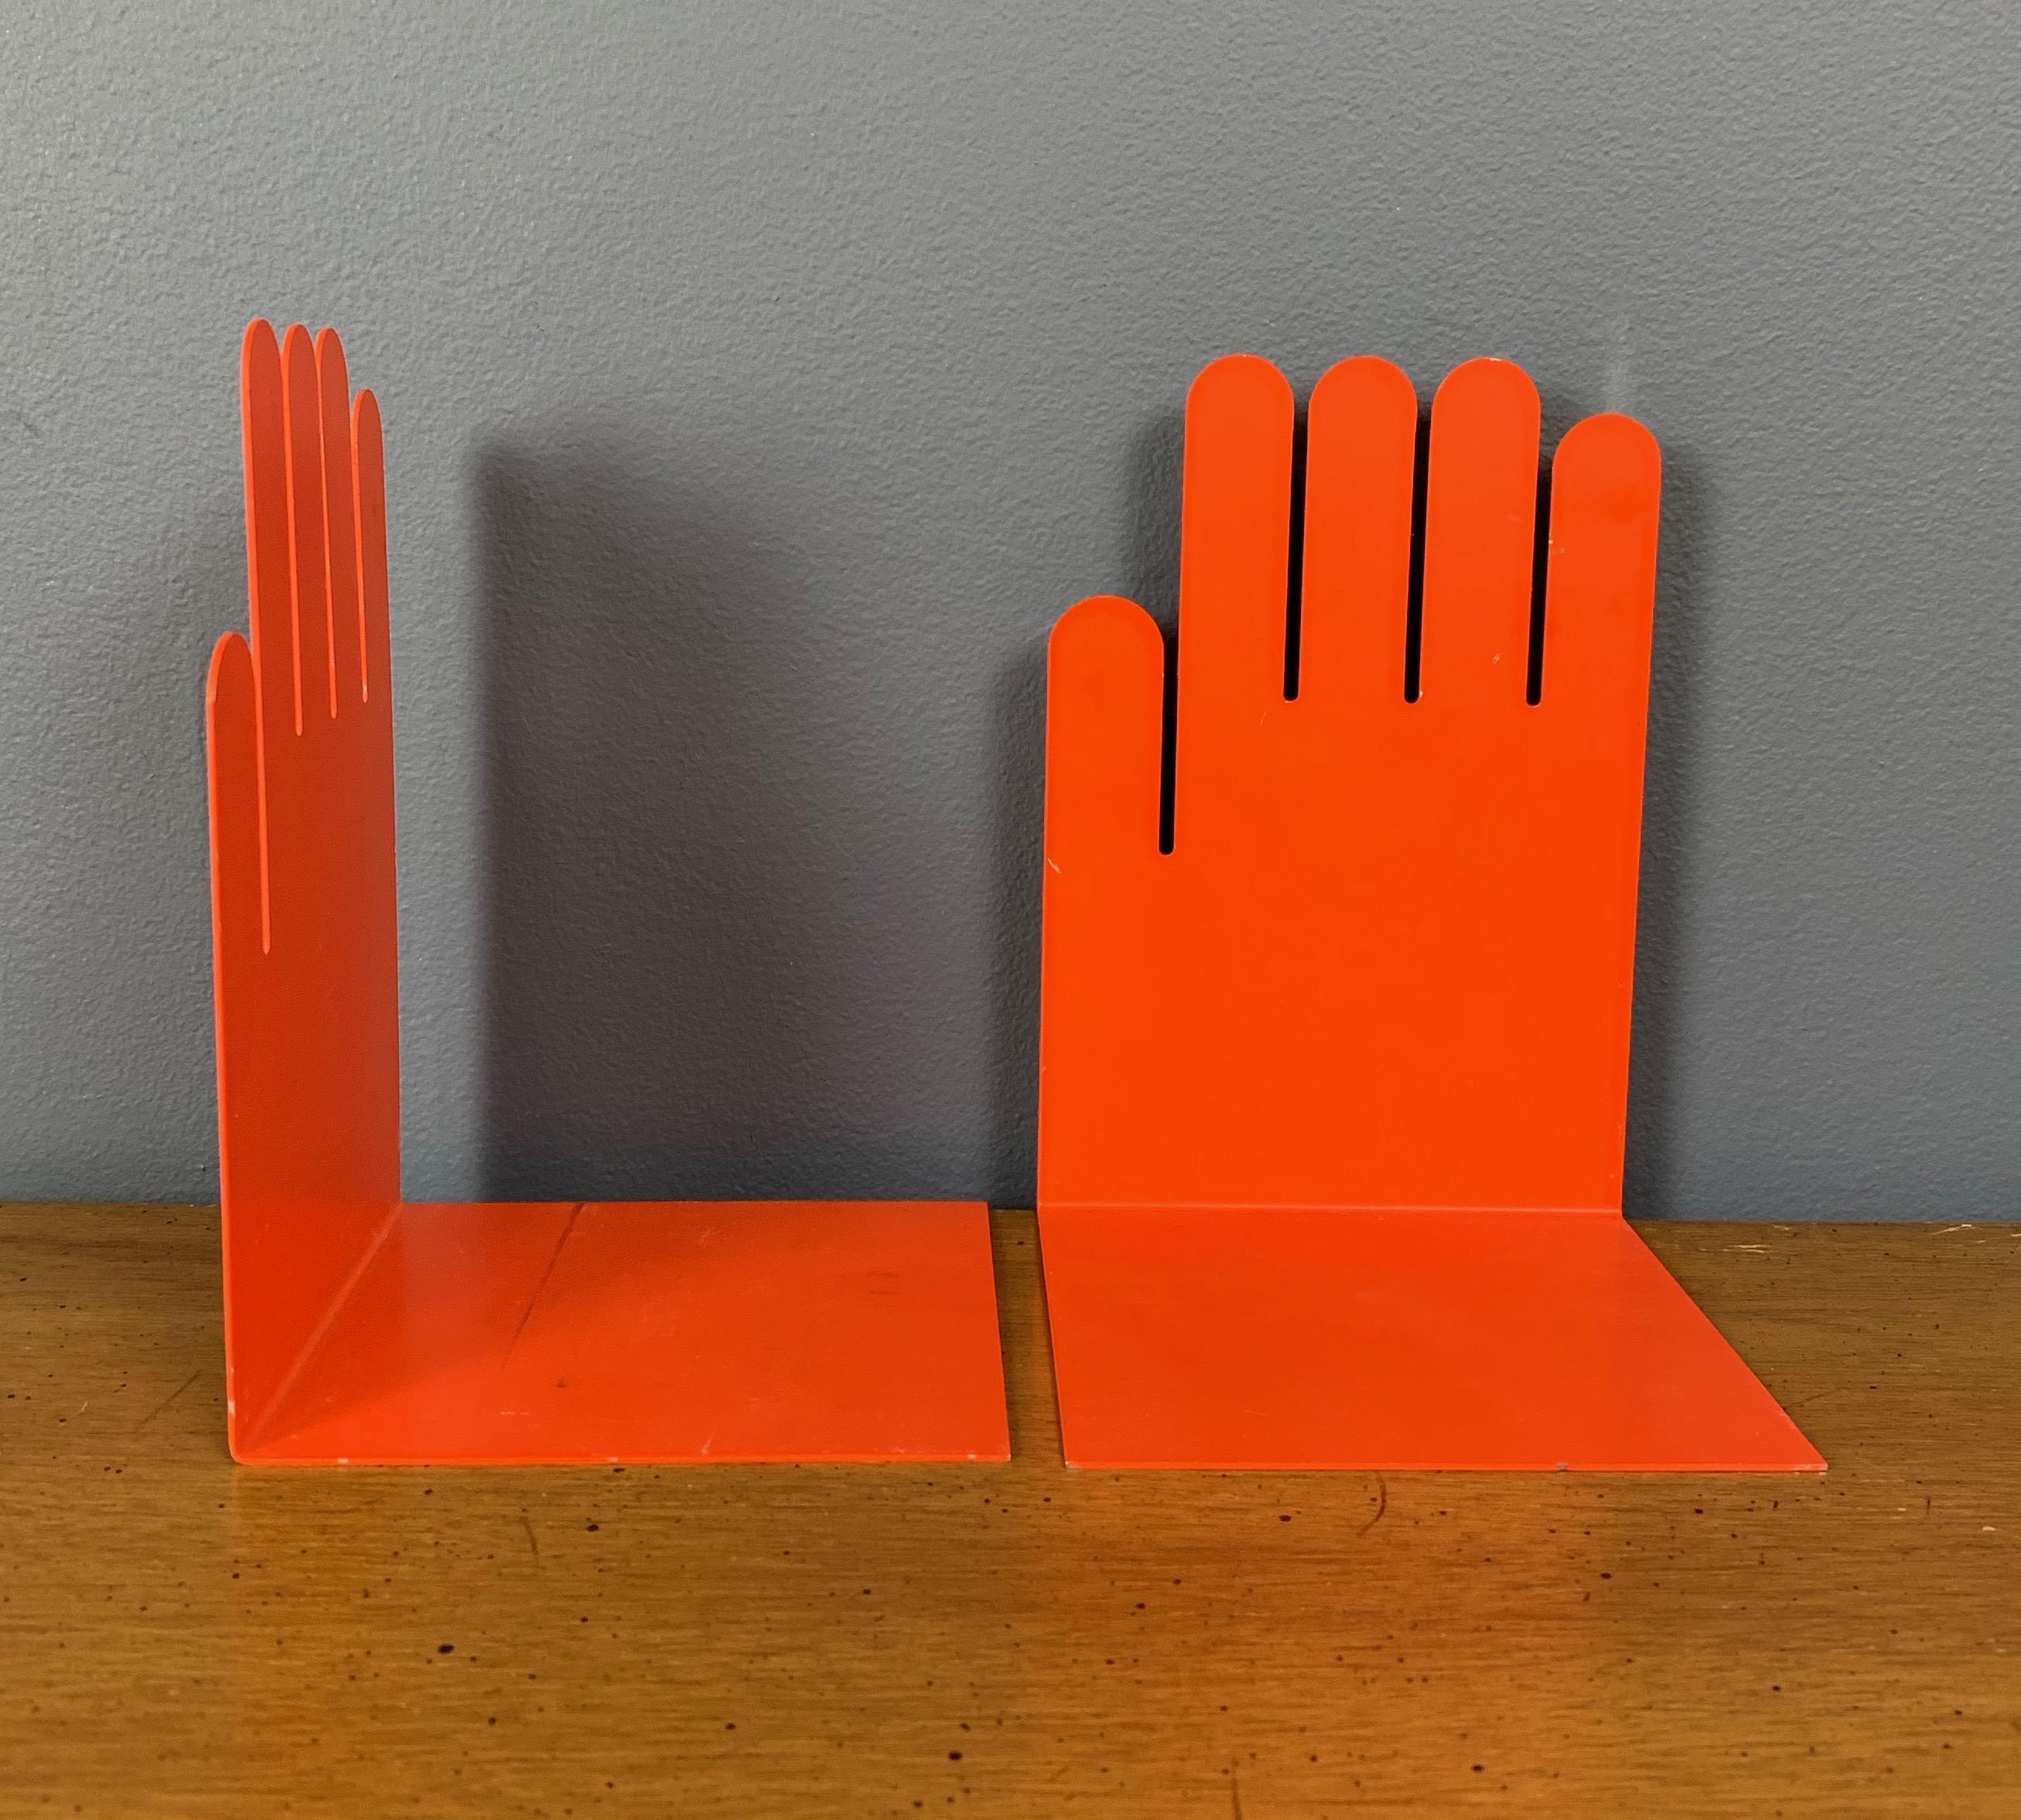 These wonderful bright orange bookends were produced in Germany in the 1980s and reproduced in the United States. Make no mistake... these are the originals and they will put a bit of pizzaz in any room!